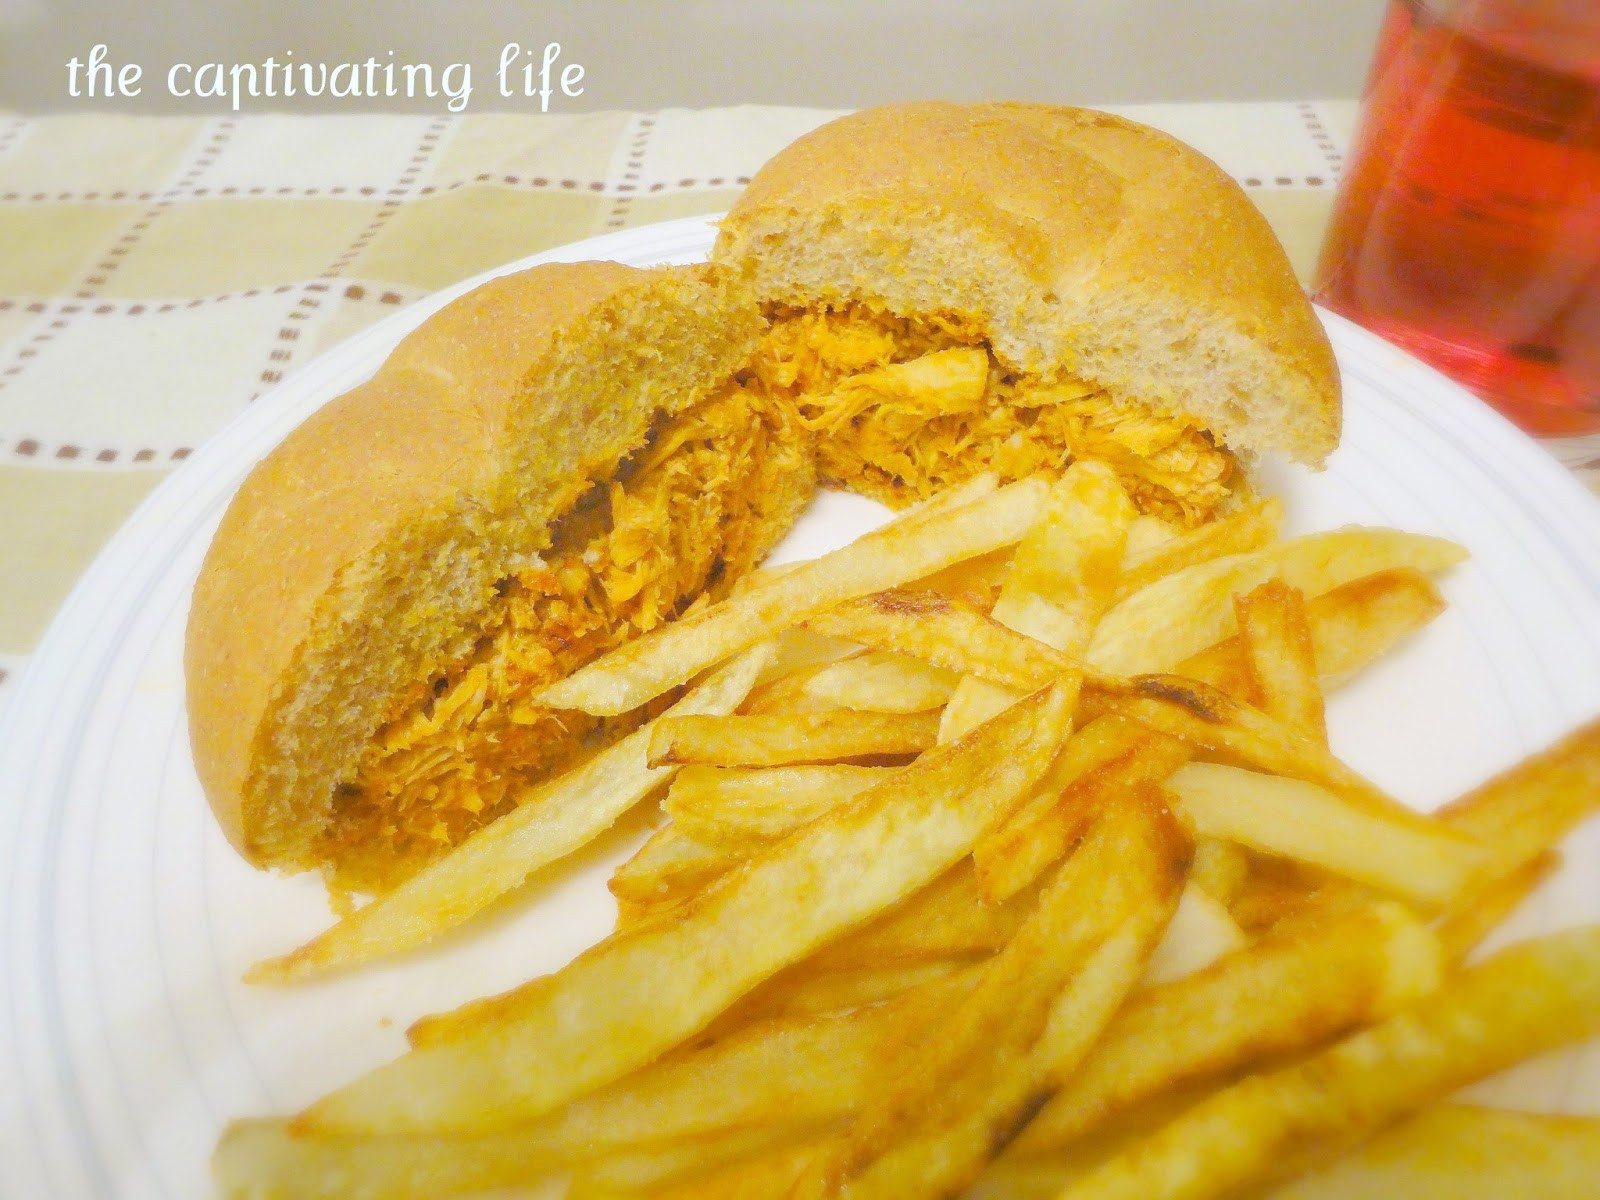 Slow Cooker Buffalo Chicken Sandwiches
 The Captivating Life Slow Cooker Buffalo Chicken Sandwiches